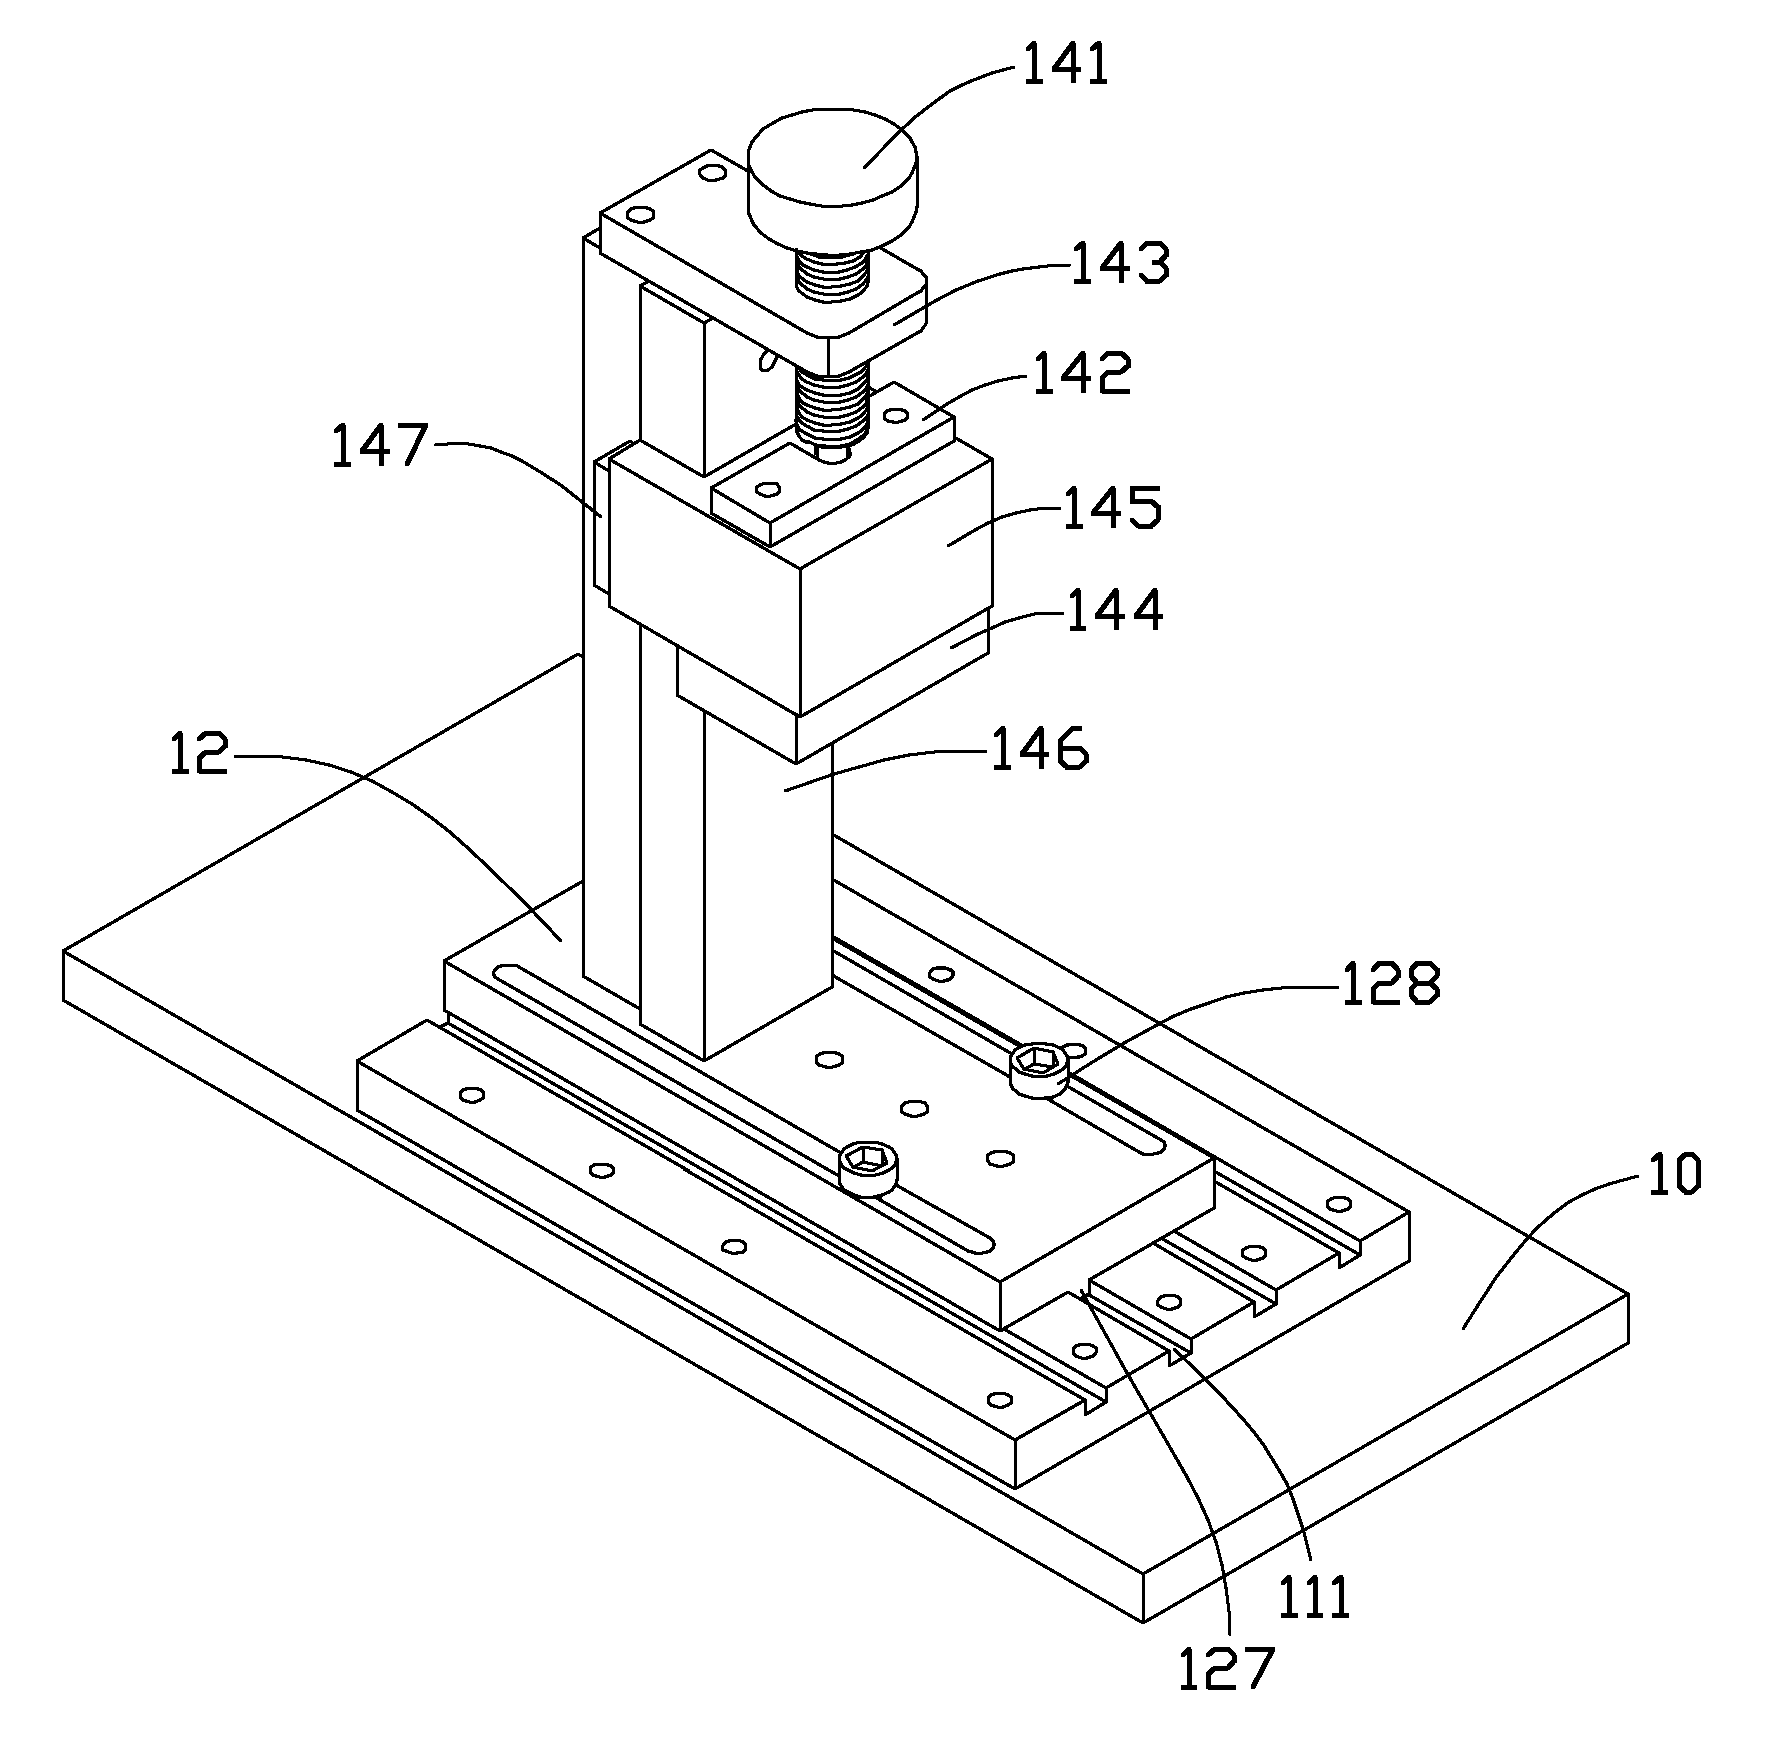 Clamping device for portable electronic device